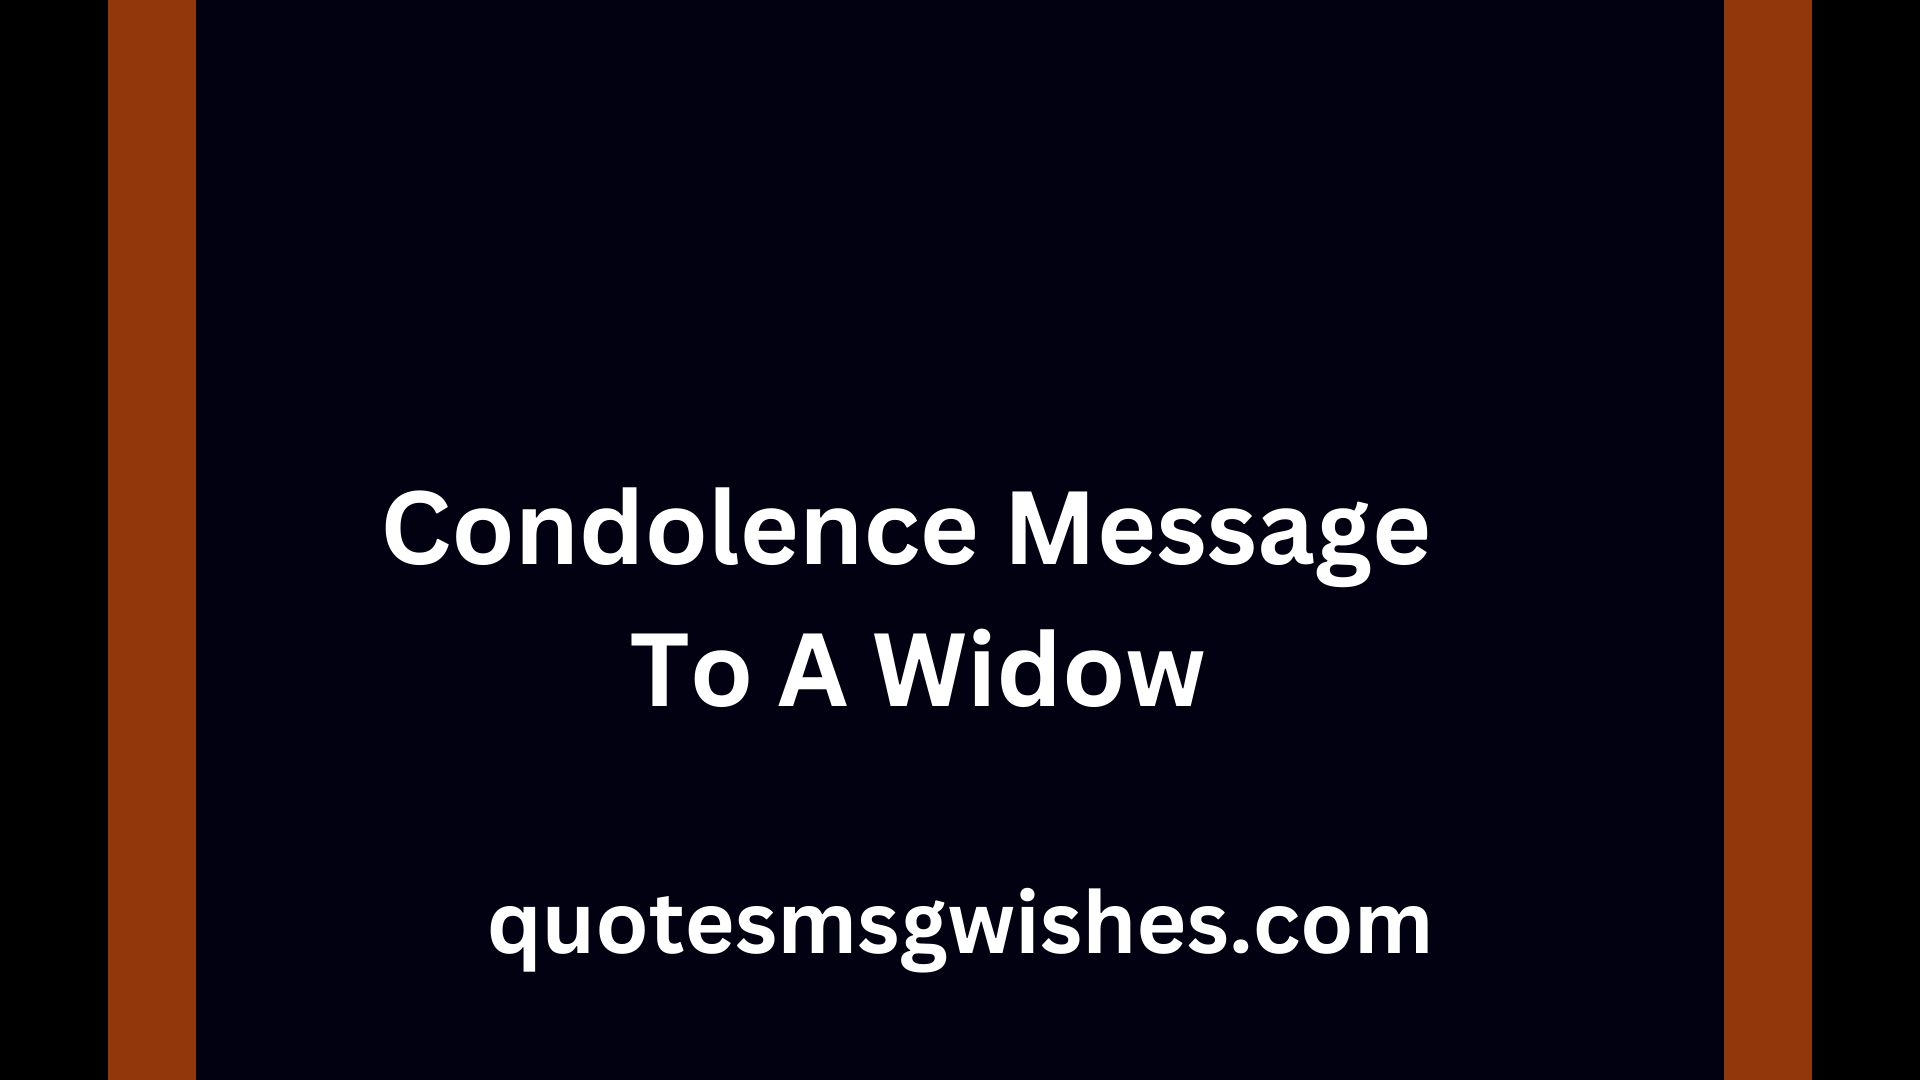 Condolence Message To A Widow